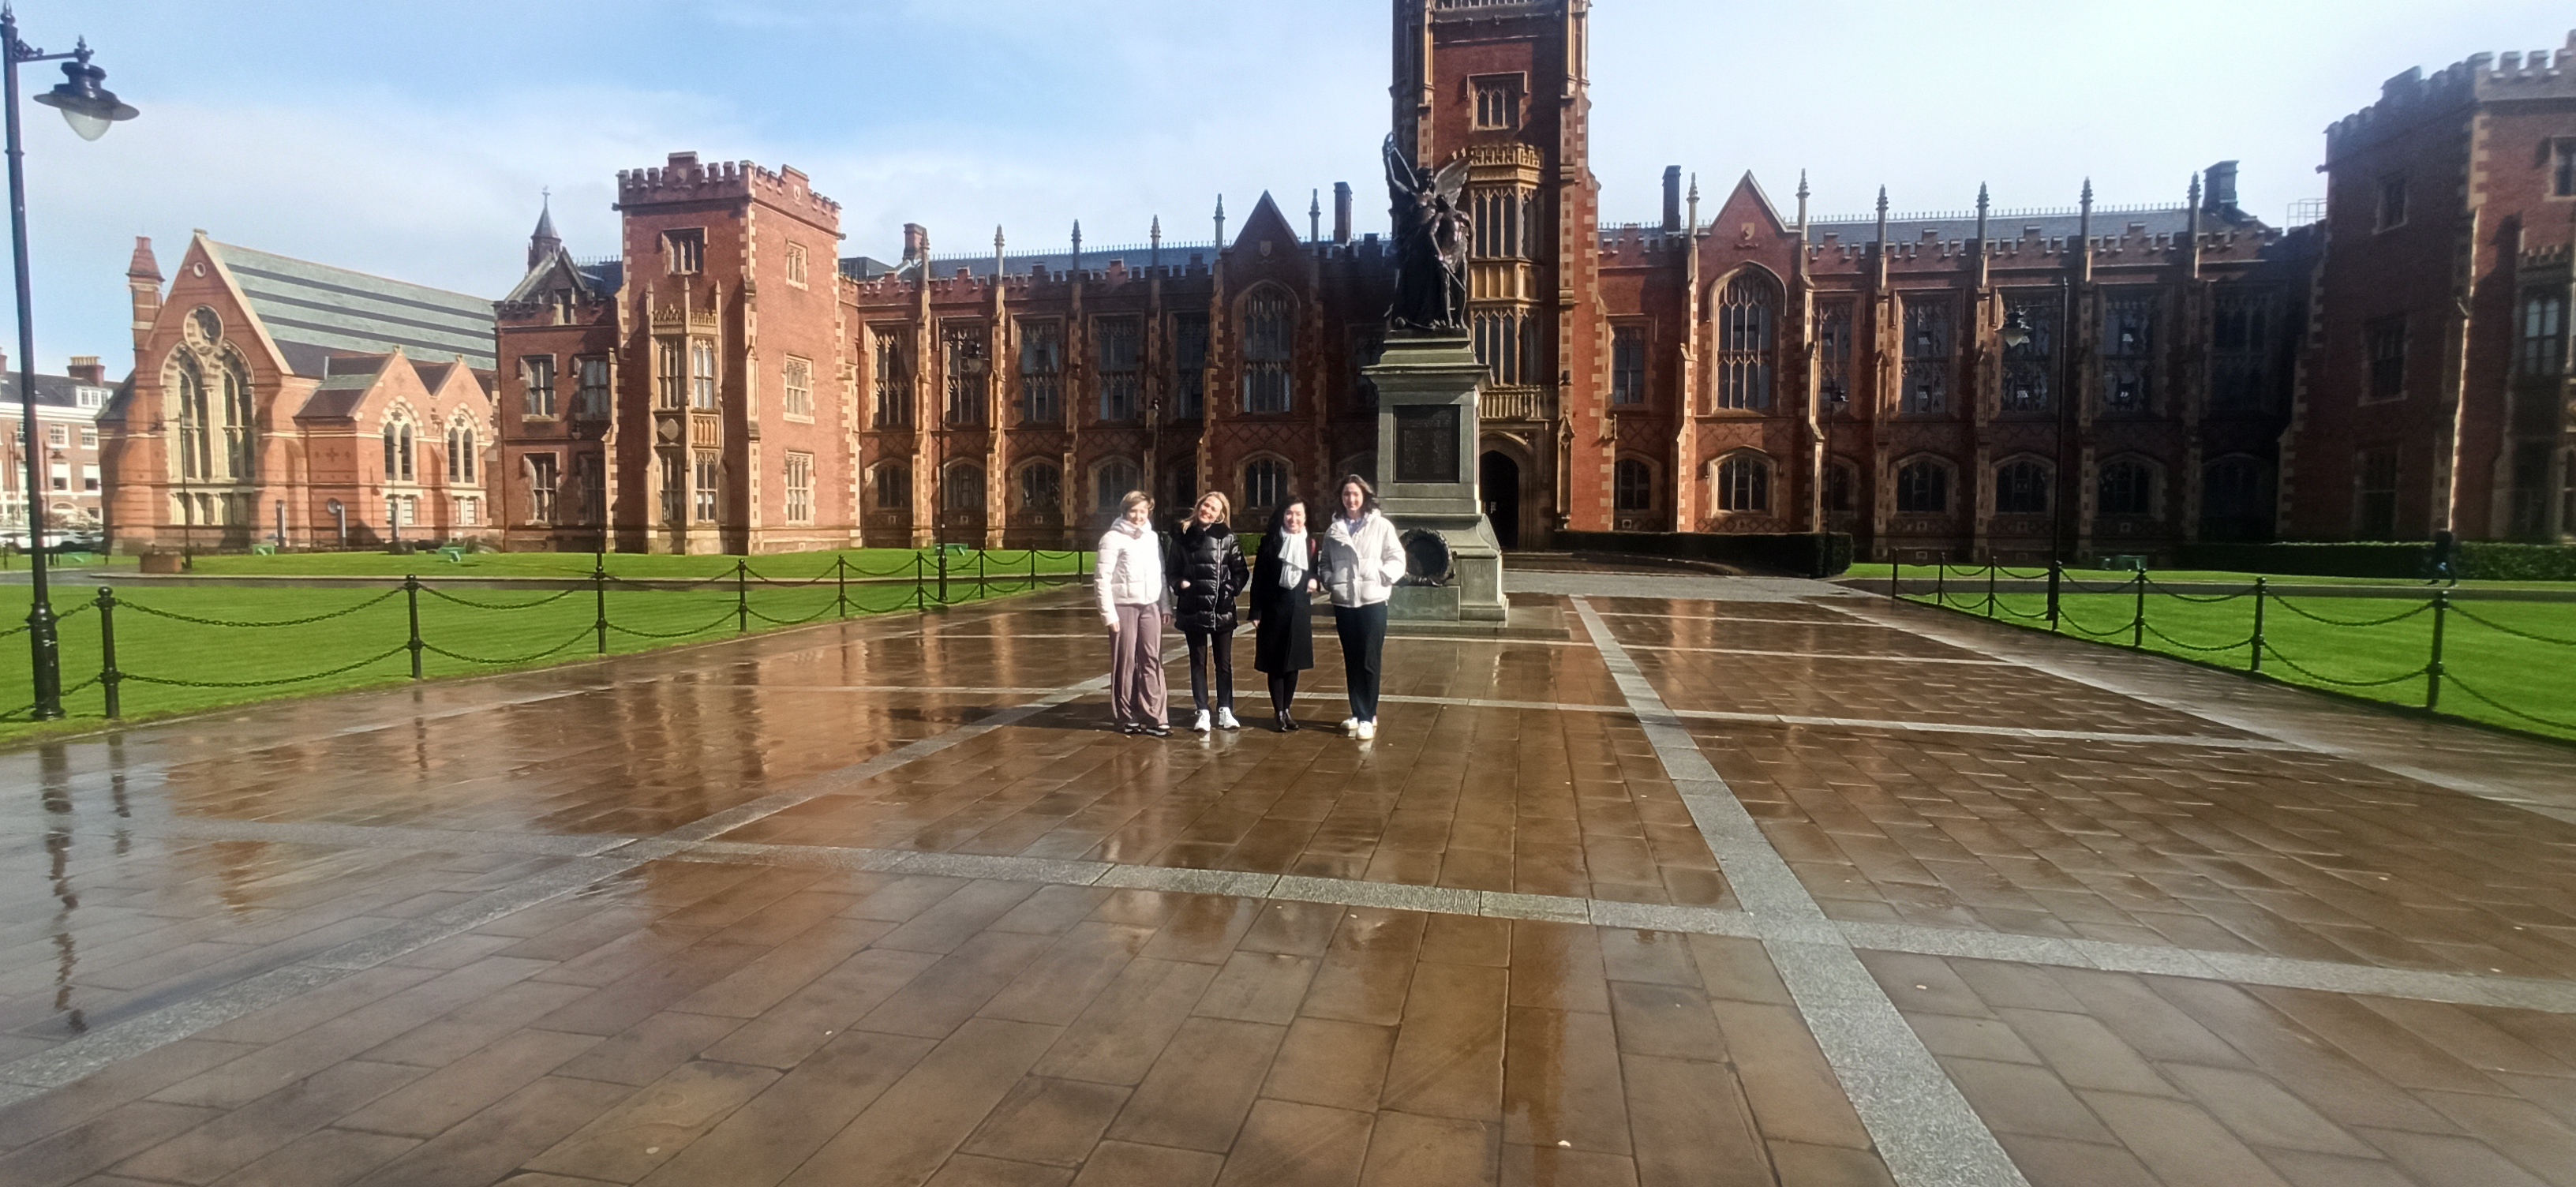 Joint Trauma-Focused Research in Clinical Psychology: A Cooperation Between Lesya Ukrainka Volyn National University and Queen’s University Belfast